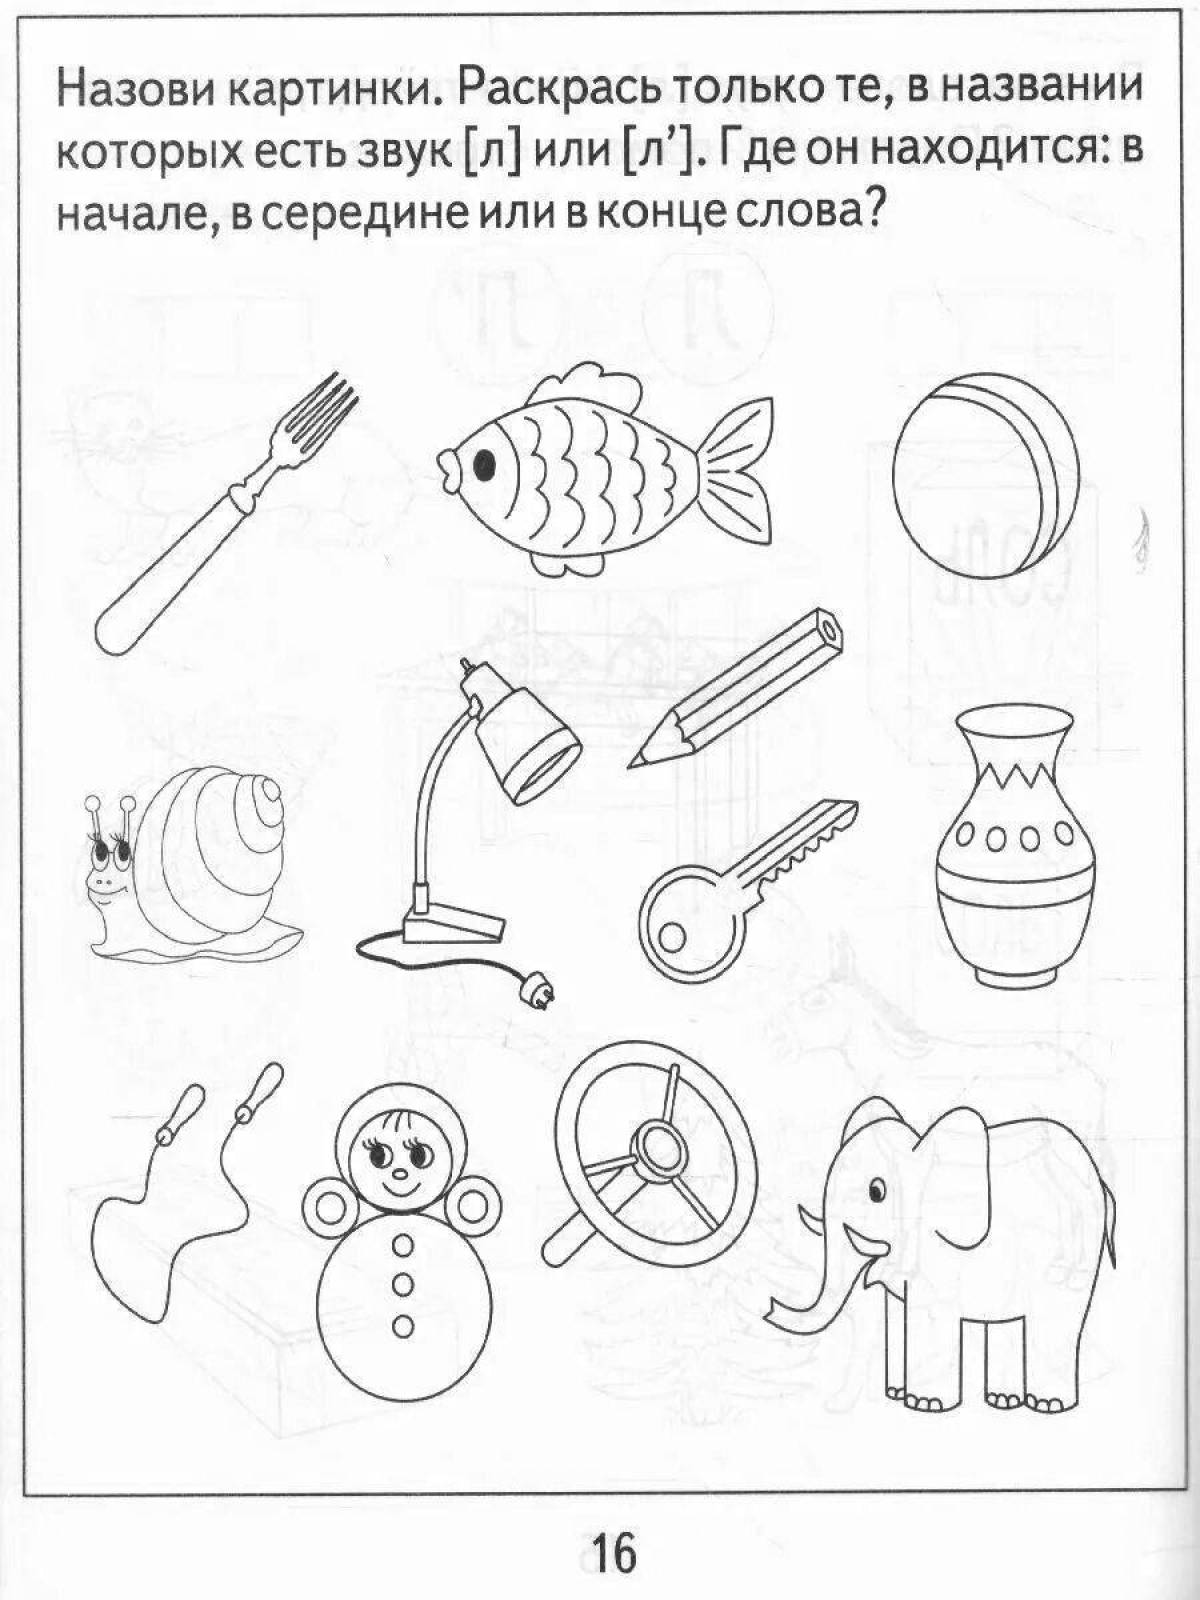 Color-frenzy speech therapy class coloring book